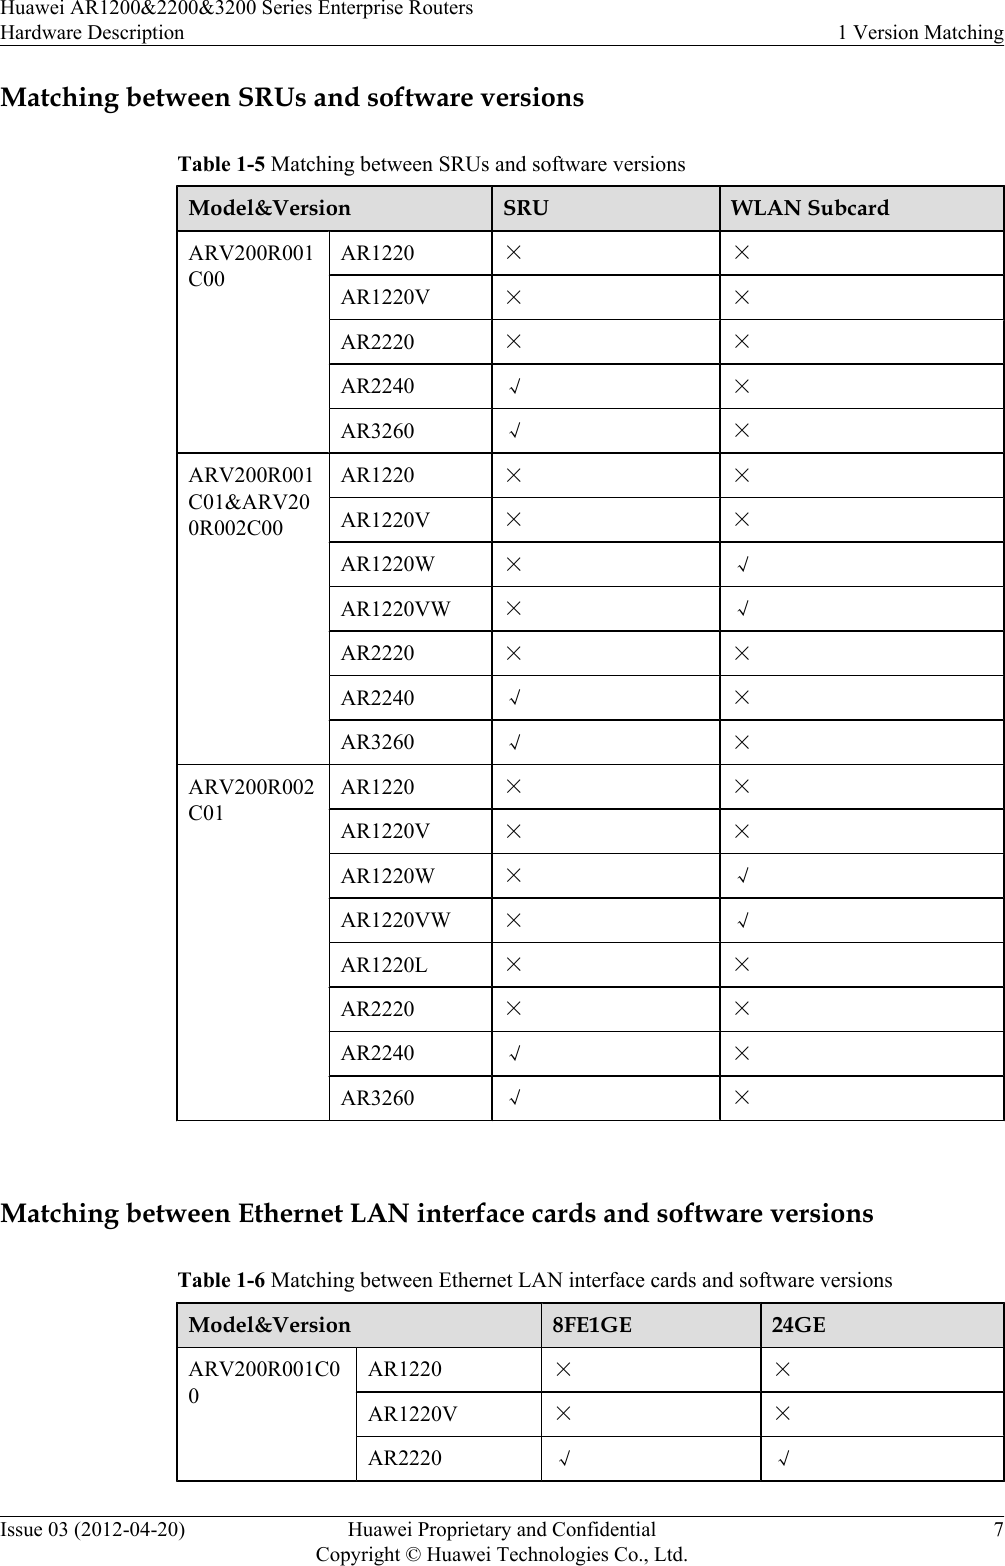 Matching between SRUs and software versionsTable 1-5 Matching between SRUs and software versionsModel&amp;Version SRU WLAN SubcardARV200R001C00AR1220 × ×AR1220V × ×AR2220 × ×AR2240 √ ×AR3260 √ ×ARV200R001C01&amp;ARV200R002C00AR1220 × ×AR1220V × ×AR1220W × √AR1220VW × √AR2220 × ×AR2240 √ ×AR3260 √ ×ARV200R002C01AR1220 × ×AR1220V × ×AR1220W × √AR1220VW × √AR1220L × ×AR2220 × ×AR2240 √ ×AR3260 √ × Matching between Ethernet LAN interface cards and software versionsTable 1-6 Matching between Ethernet LAN interface cards and software versionsModel&amp;Version 8FE1GE 24GEARV200R001C00AR1220 × ×AR1220V × ×AR2220 √ √Huawei AR1200&amp;2200&amp;3200 Series Enterprise RoutersHardware Description 1 Version MatchingIssue 03 (2012-04-20) Huawei Proprietary and ConfidentialCopyright © Huawei Technologies Co., Ltd.7